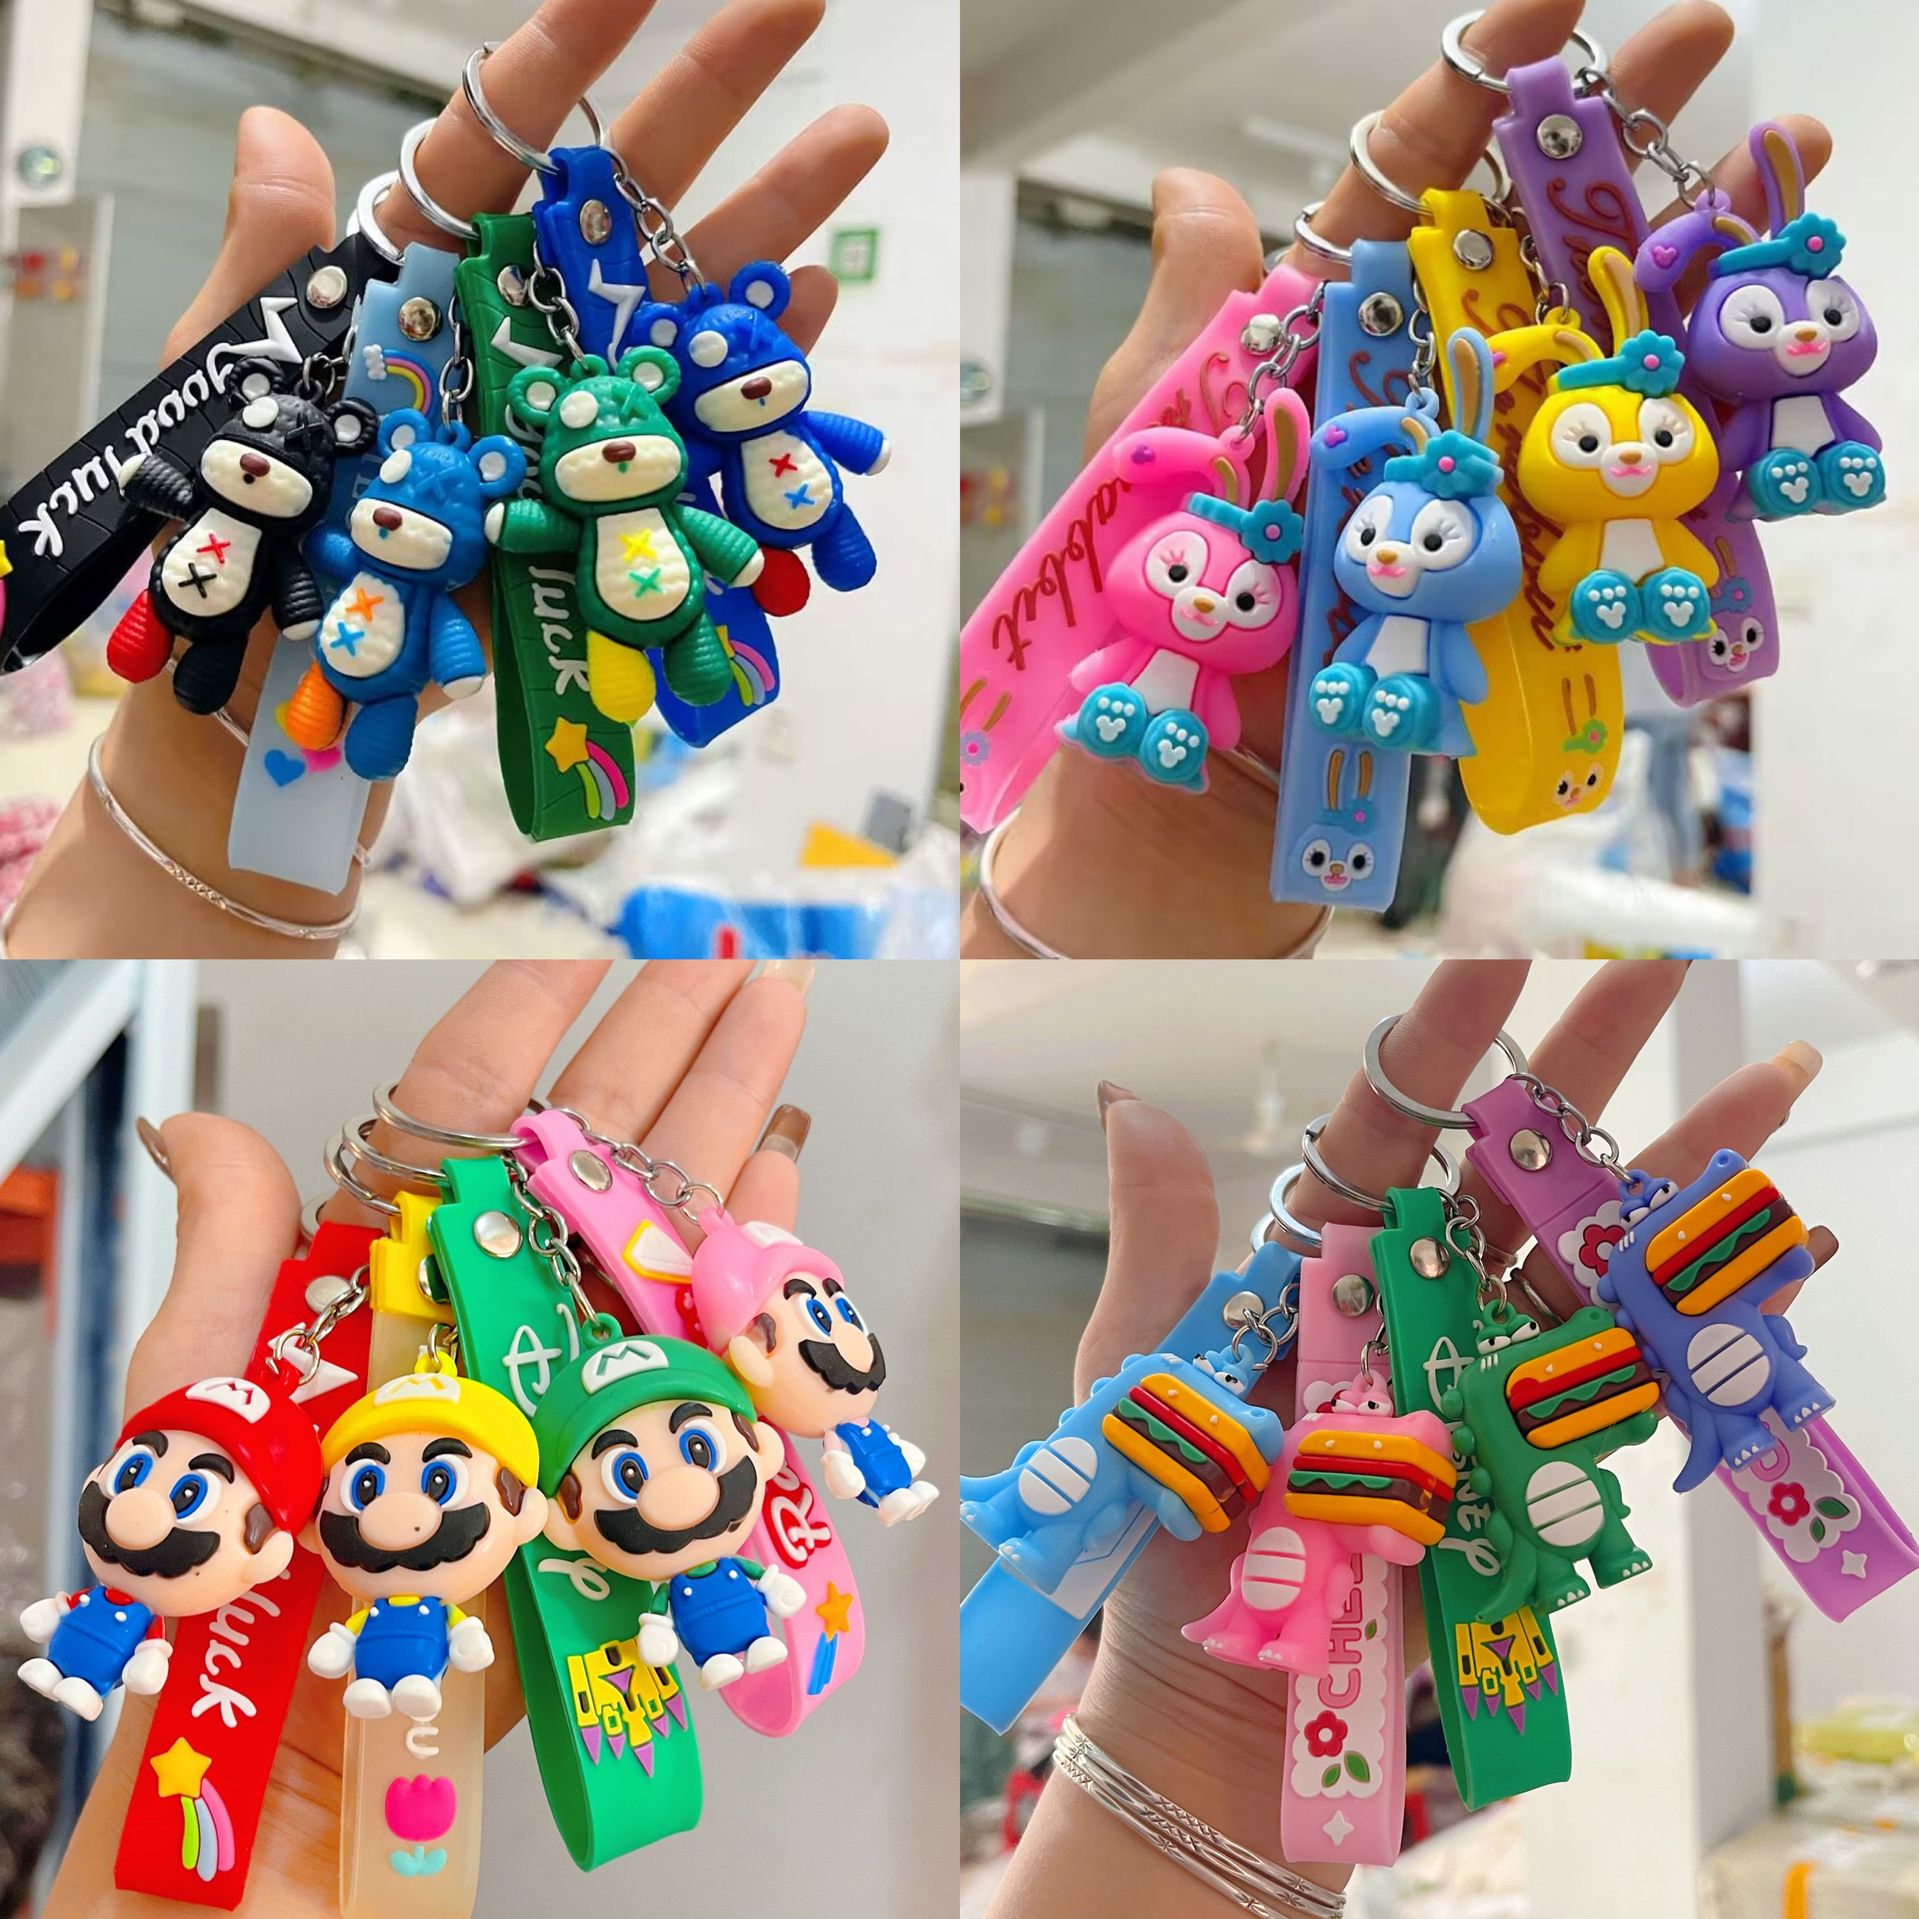 Trending Cartoon Sanrio Tigger Spaceman Keychain Cars and Bags Pendant Push Small Gift Wholesale